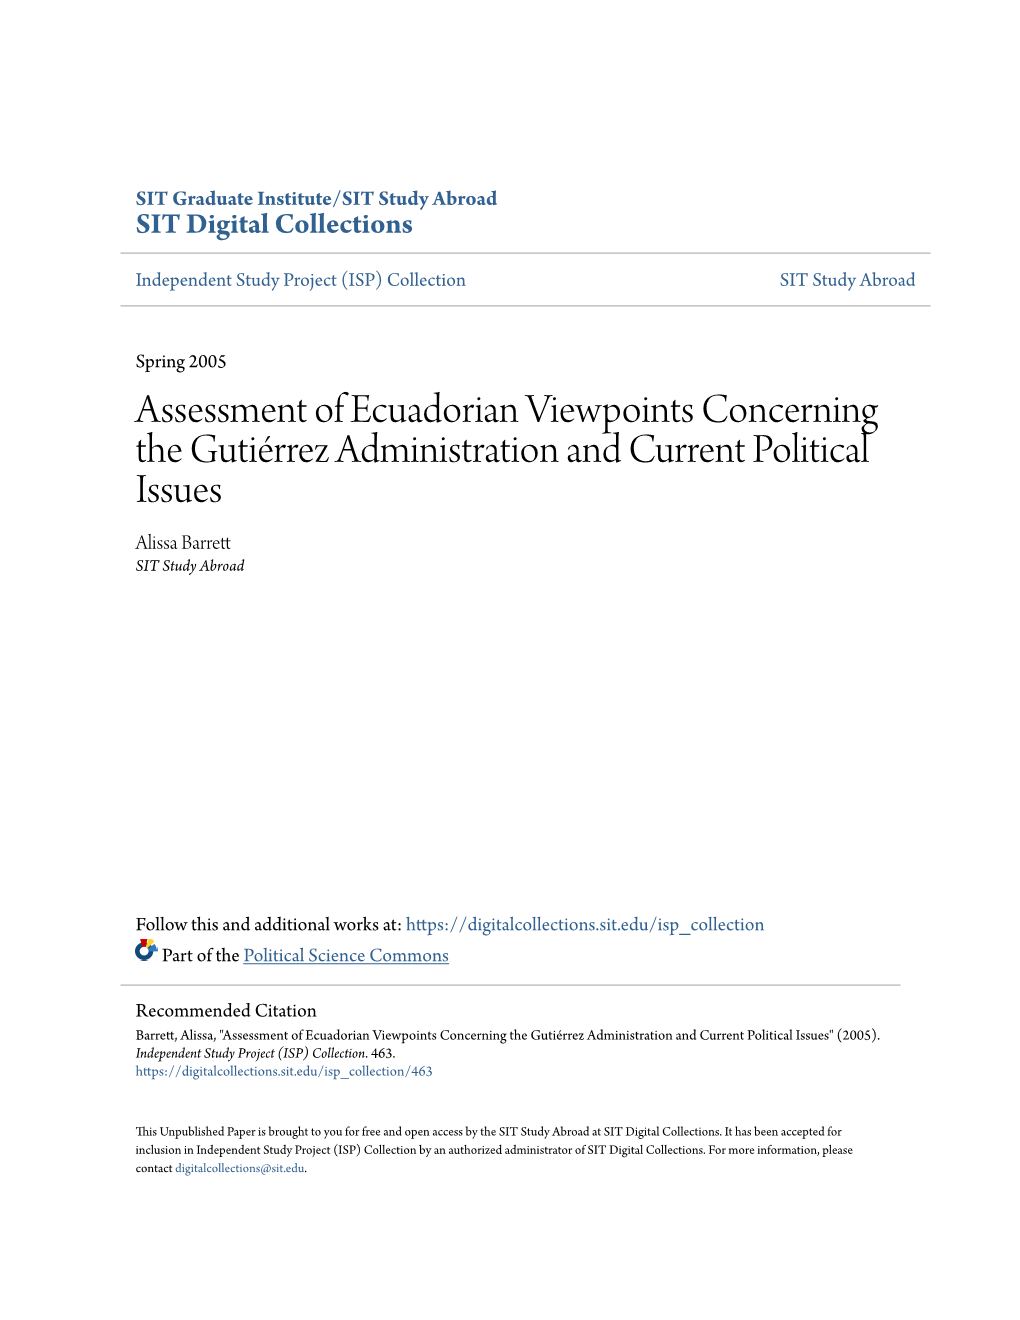 Assessment of Ecuadorian Viewpoints Concerning the Gutiérrez Administration and Current Political Issues Alissa Barrett SIT Study Abroad